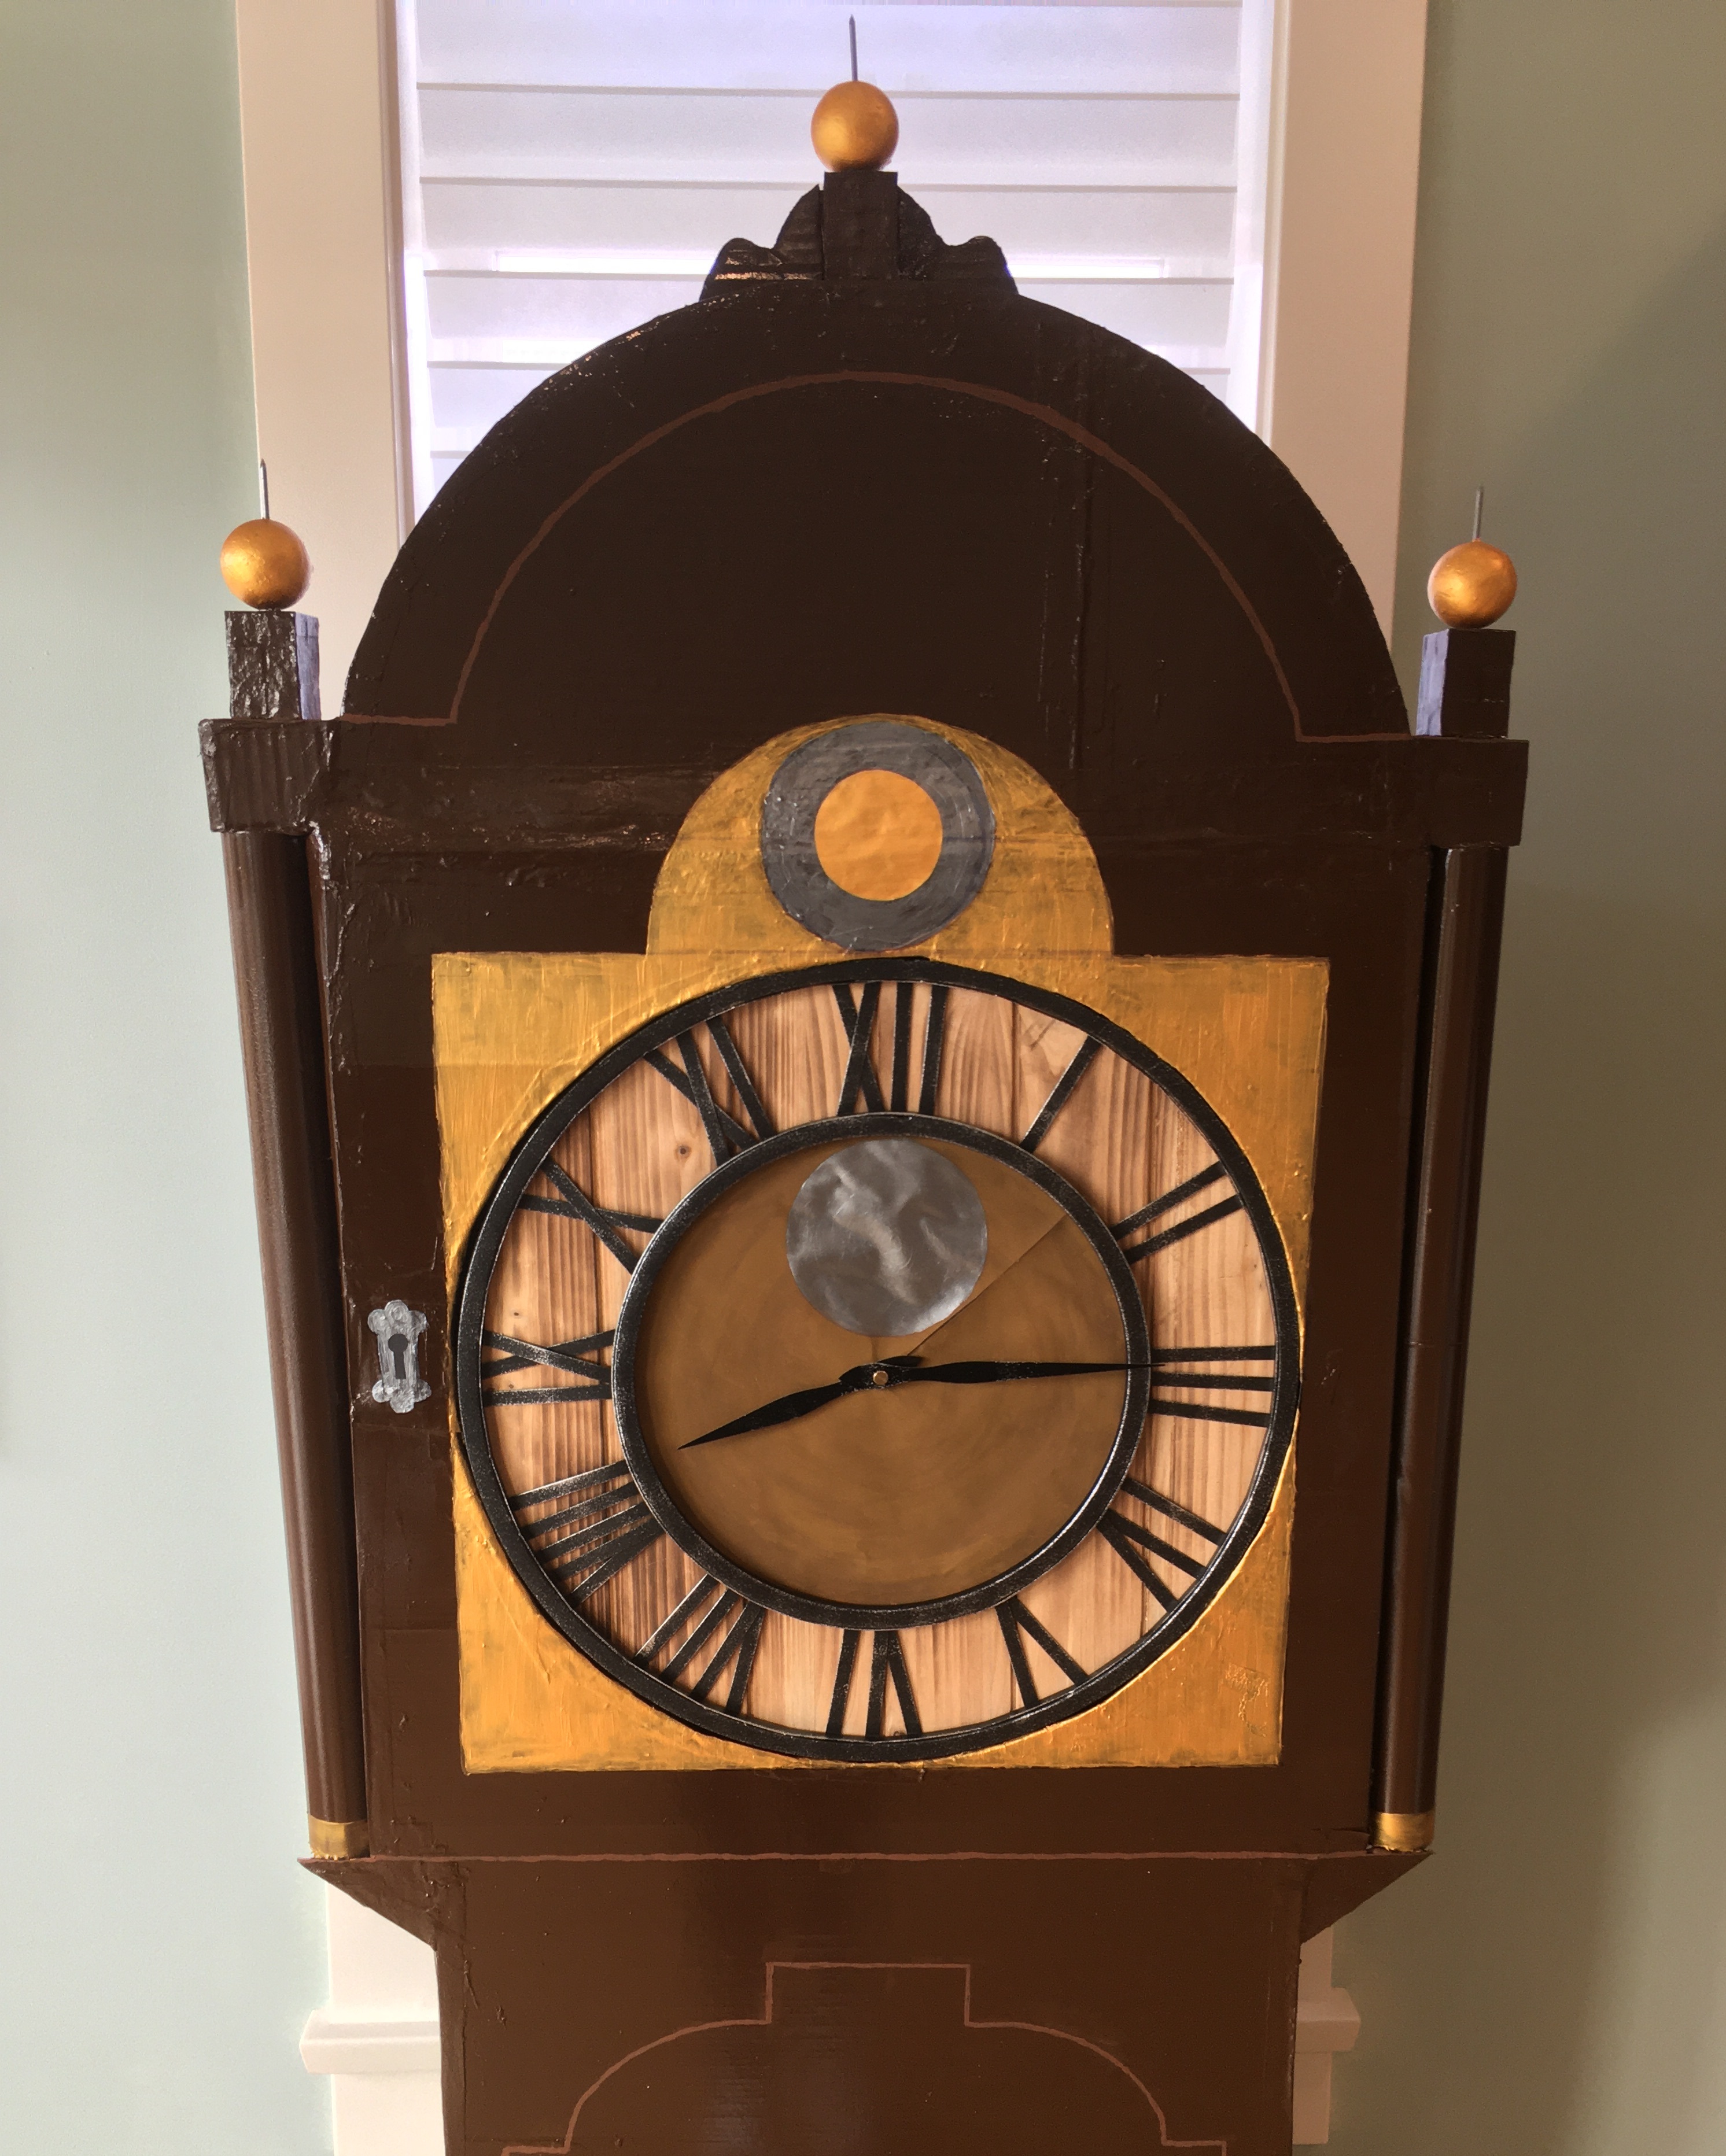 Close up of clock face of a Stranger Things Haunted House grandfather clock prop